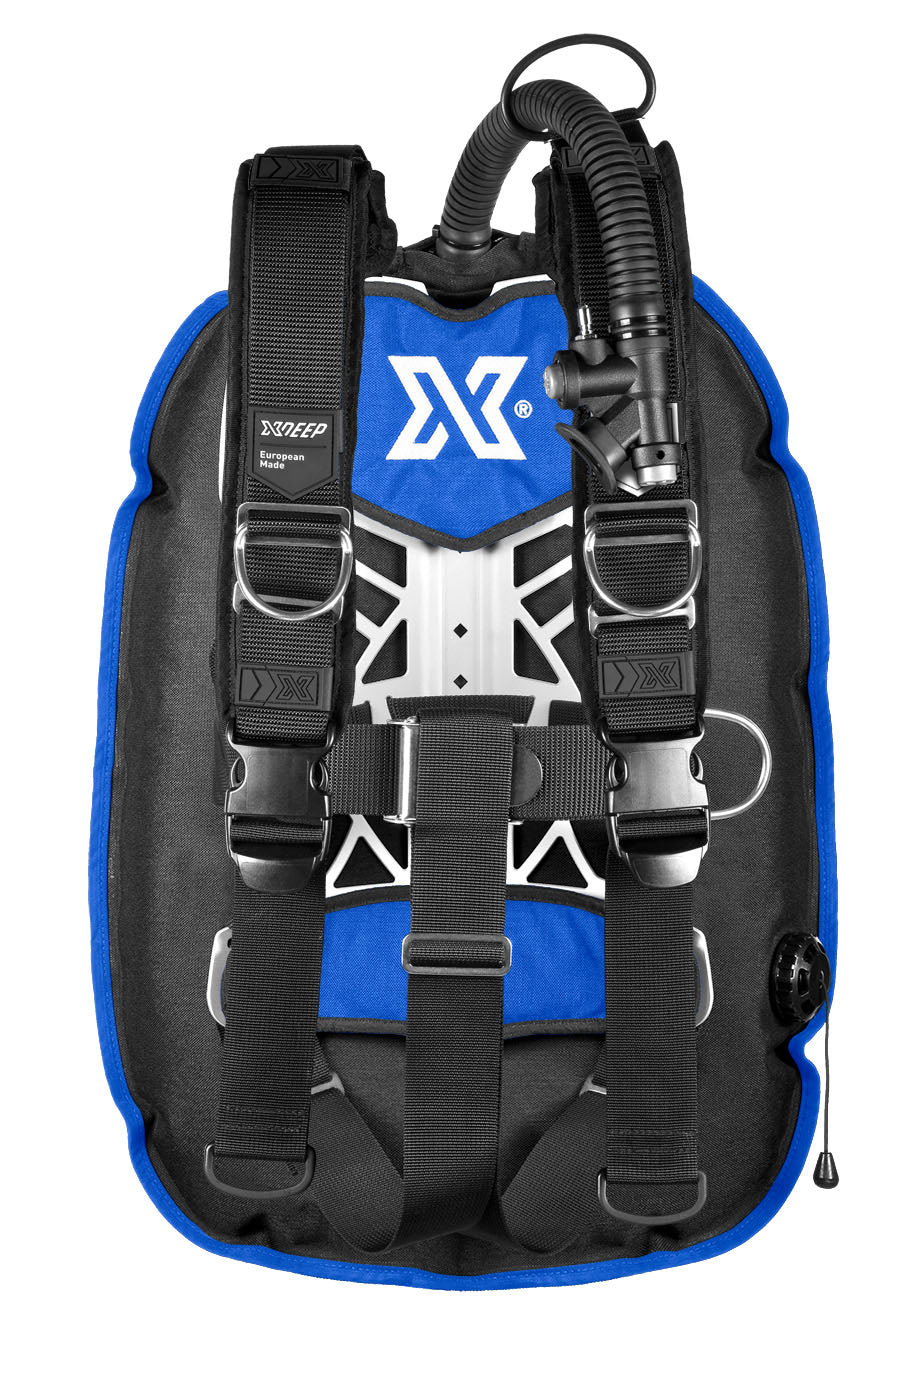 XDEEP XDEEP GHOST Full Setup with Standard or Deluxe harness Blue / Deluxe / Small - Oyster Diving